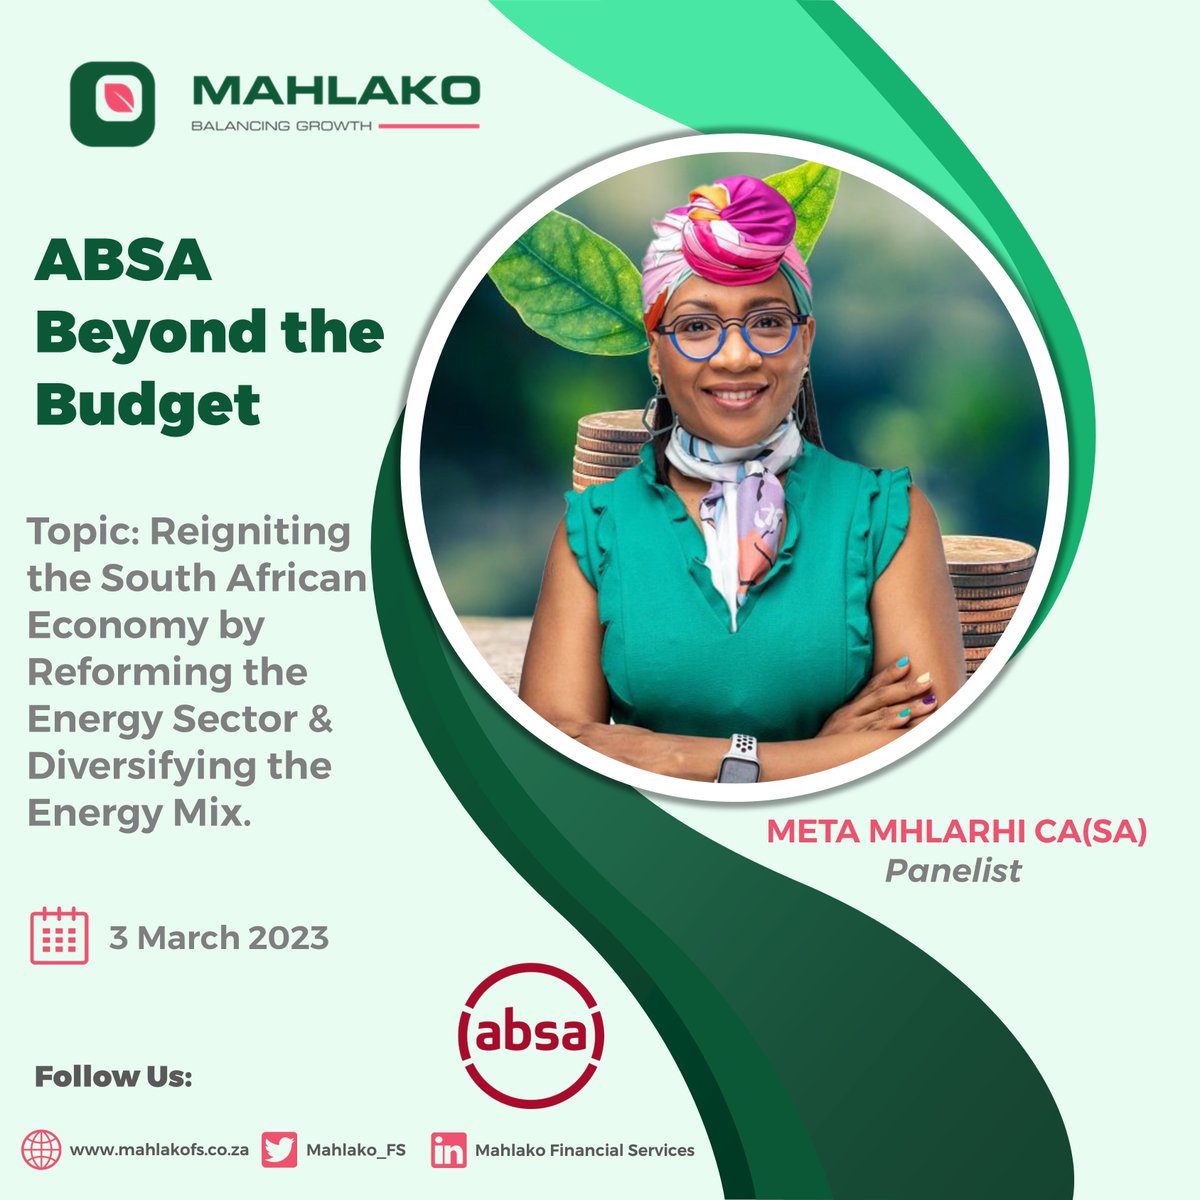 With the #BudgetSpeech having taken place last night, I'm excited to announce that I'm a panelist at the Absa Post-Budget Speech hosted on 3 March 2023.  We will focus on 'Reigniting the South African Economy by Reforming the Energy Sector & Diversifying the #EnergyMix.'